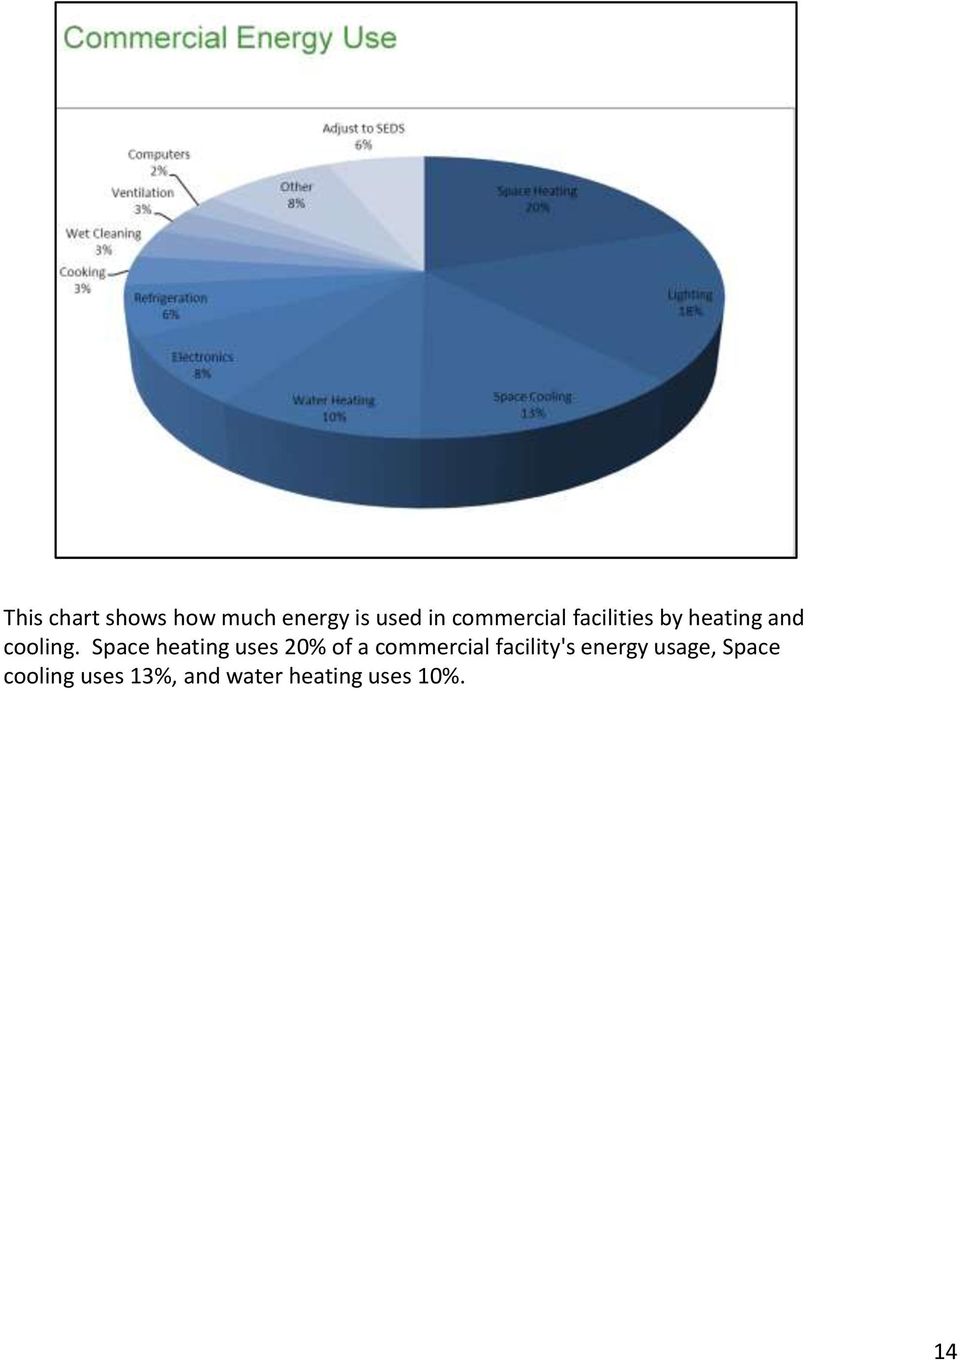 Space heating uses 20% of a commercial facility's